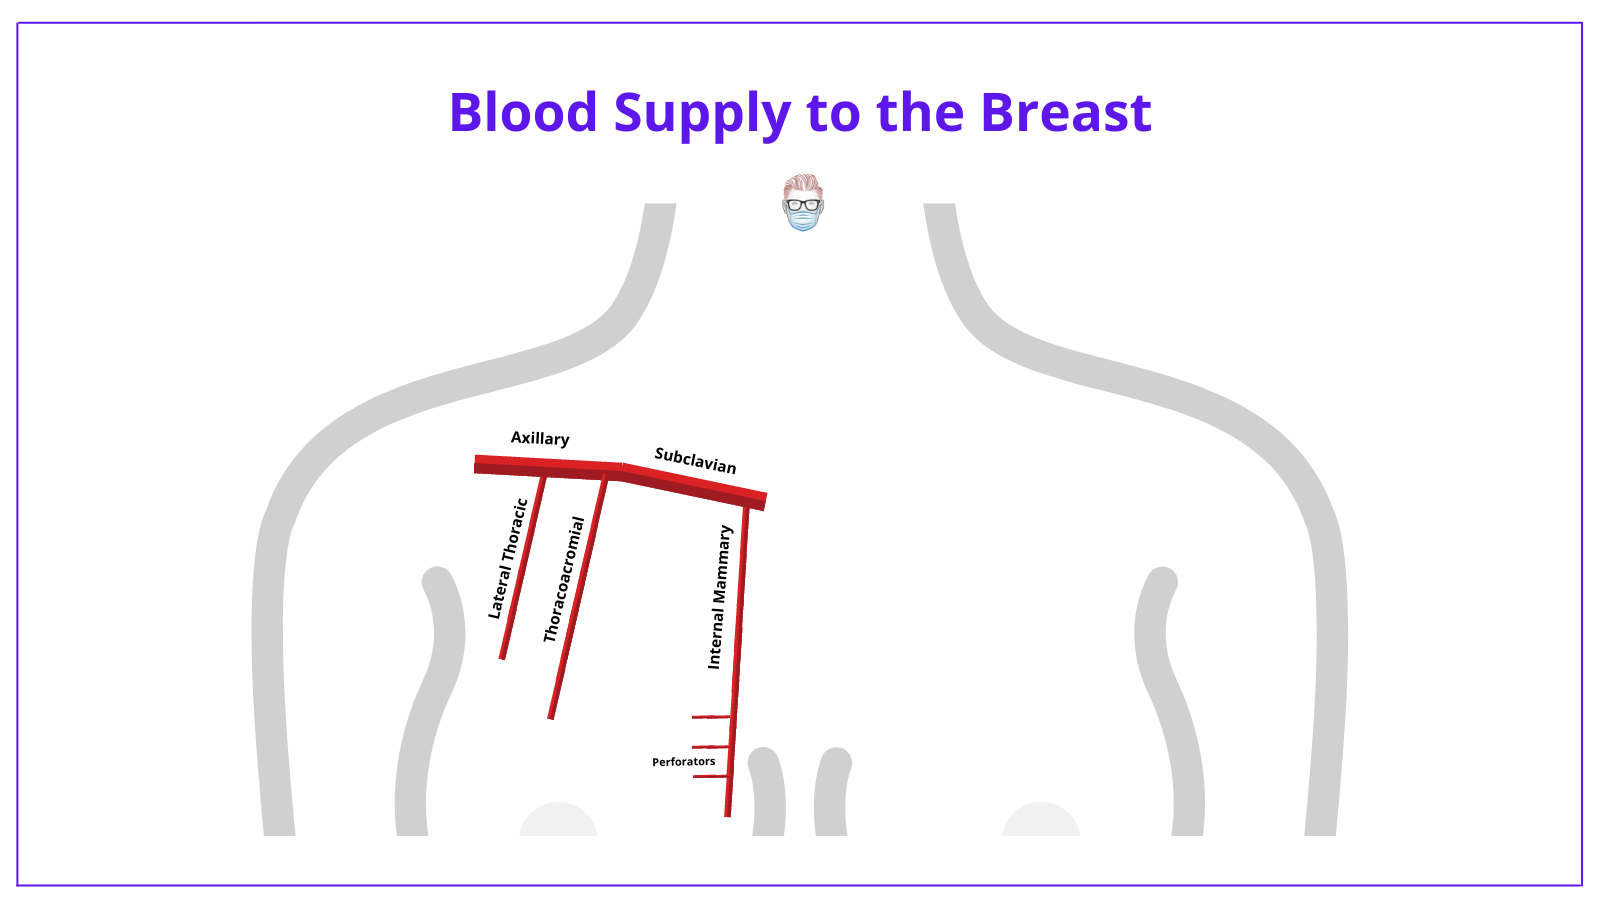 The anatomy of the breast showing the internal mammary artery, thoracoacromial arteryy and lateral thorax artery being the blood supply to the breast. 